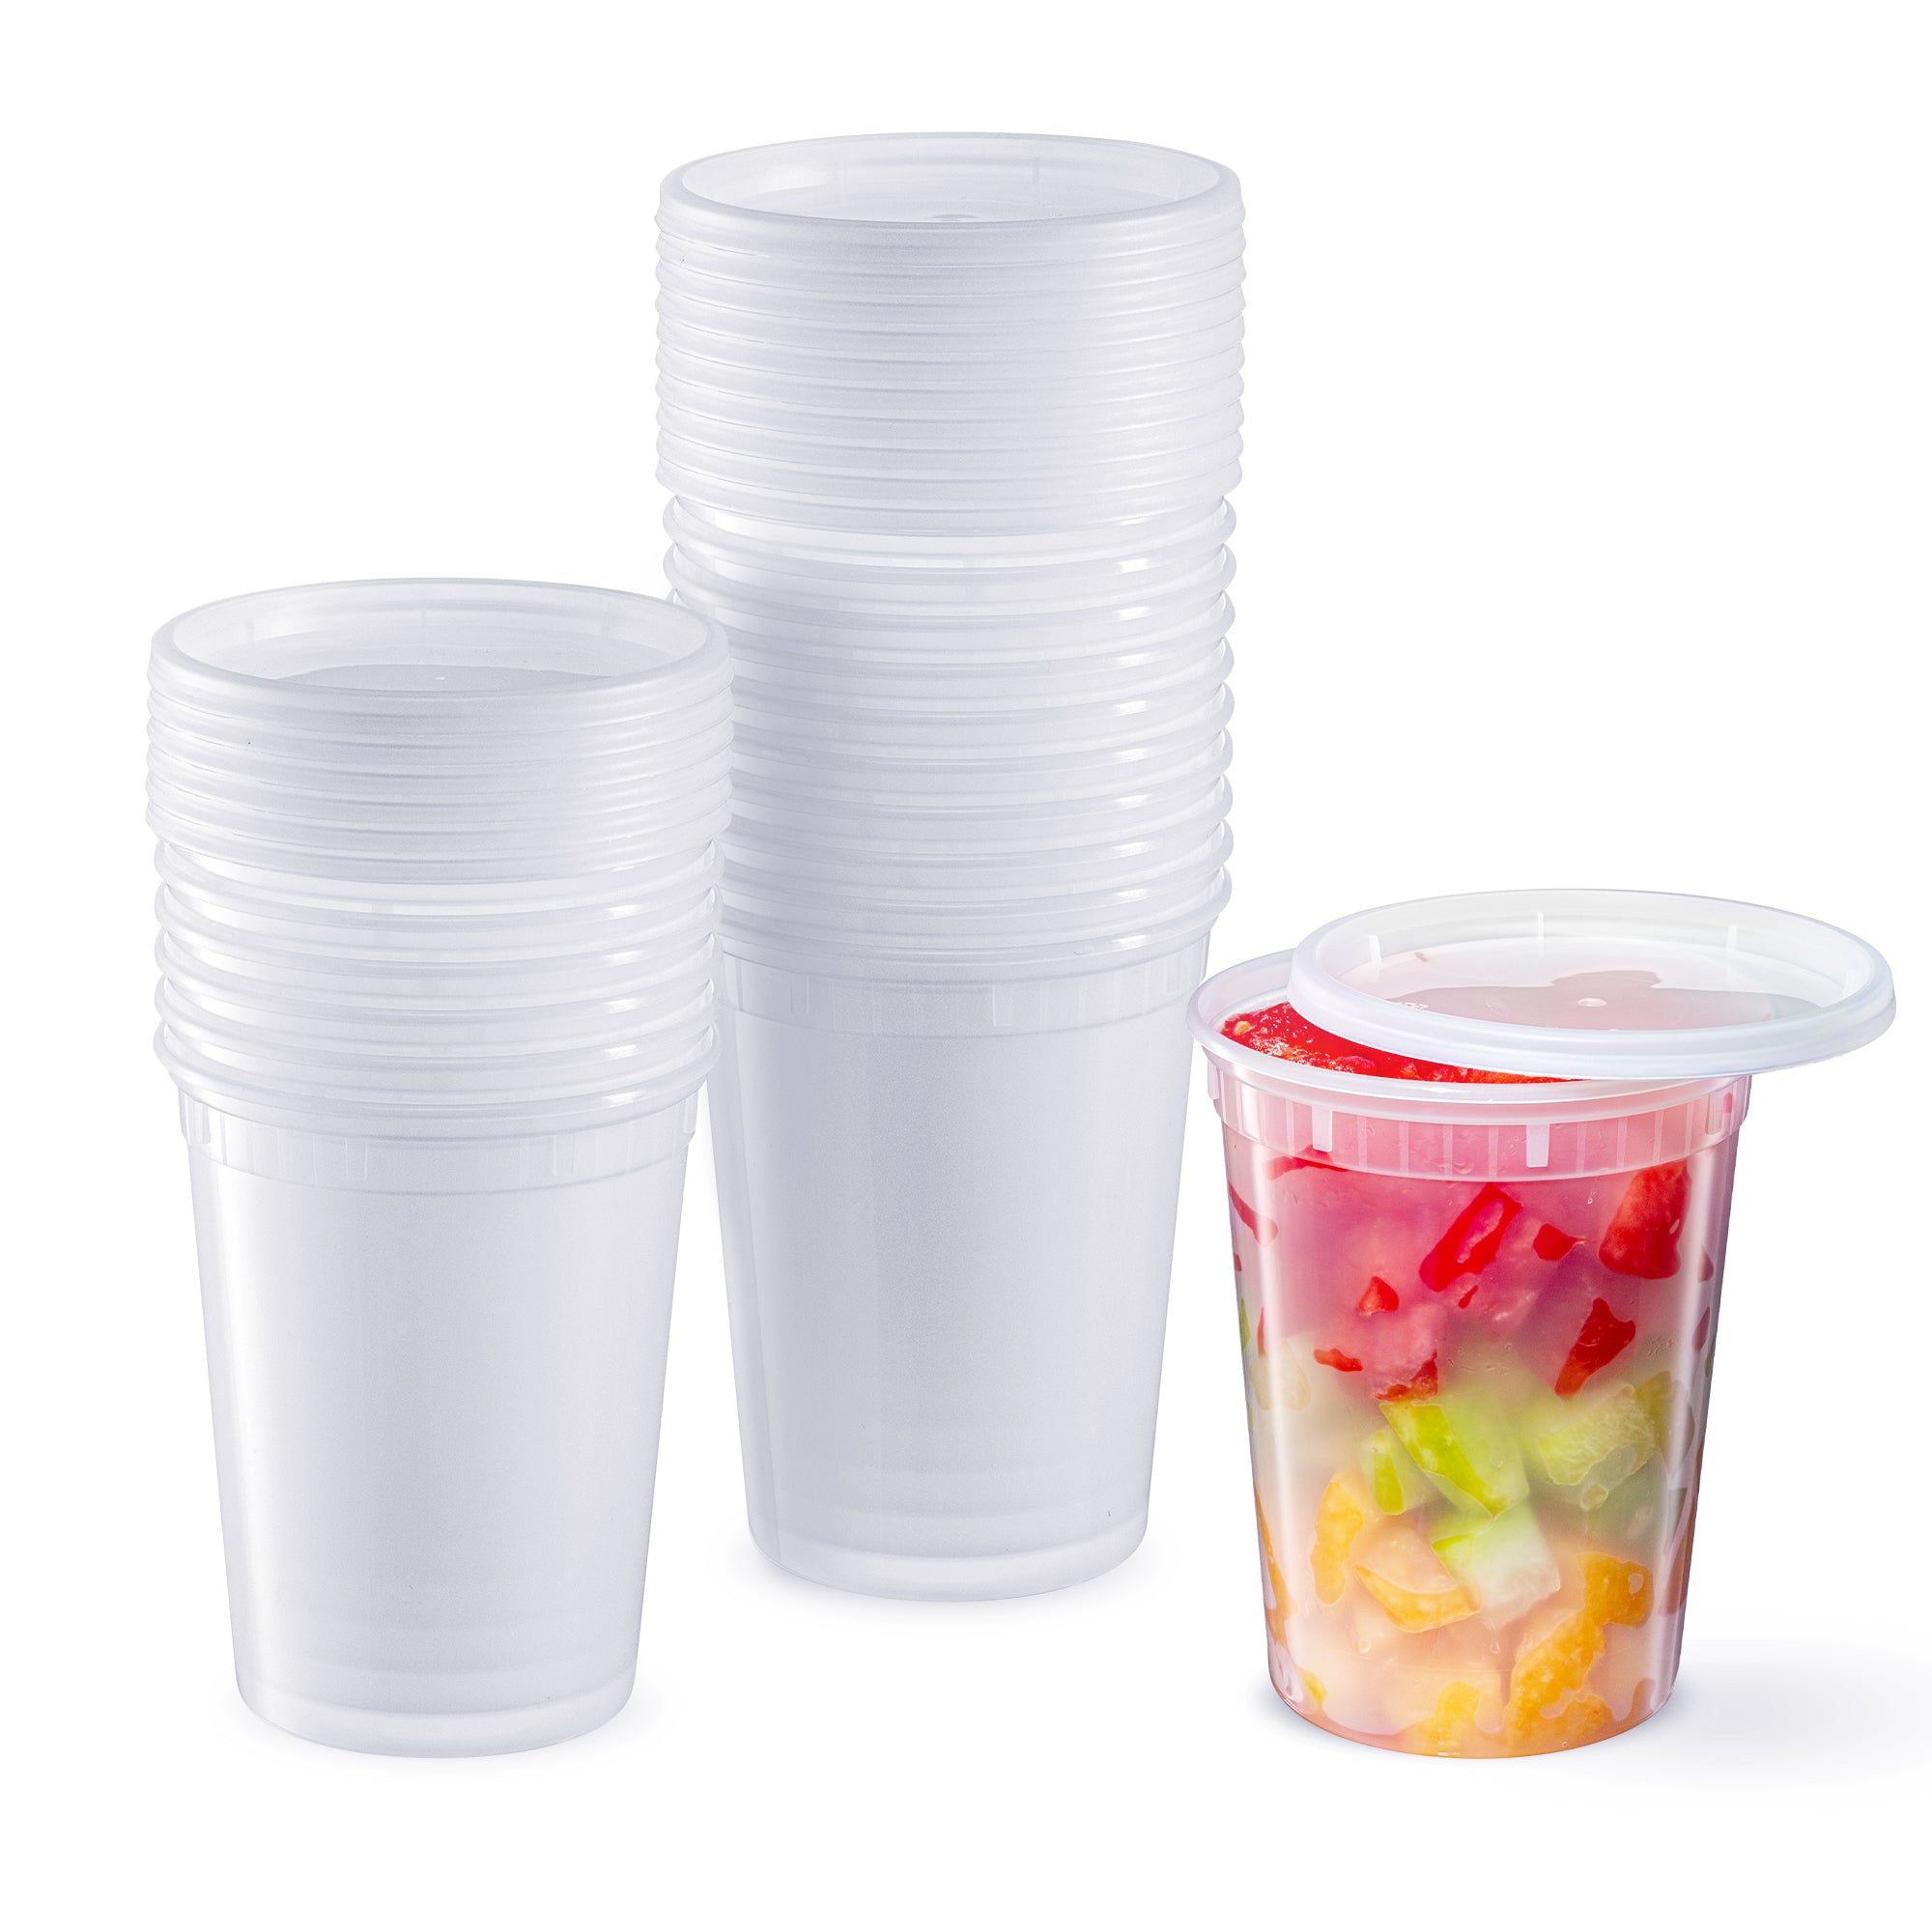 48 Sets - Combo Plastic Deli Containers With Airtight Lids - 8 oz